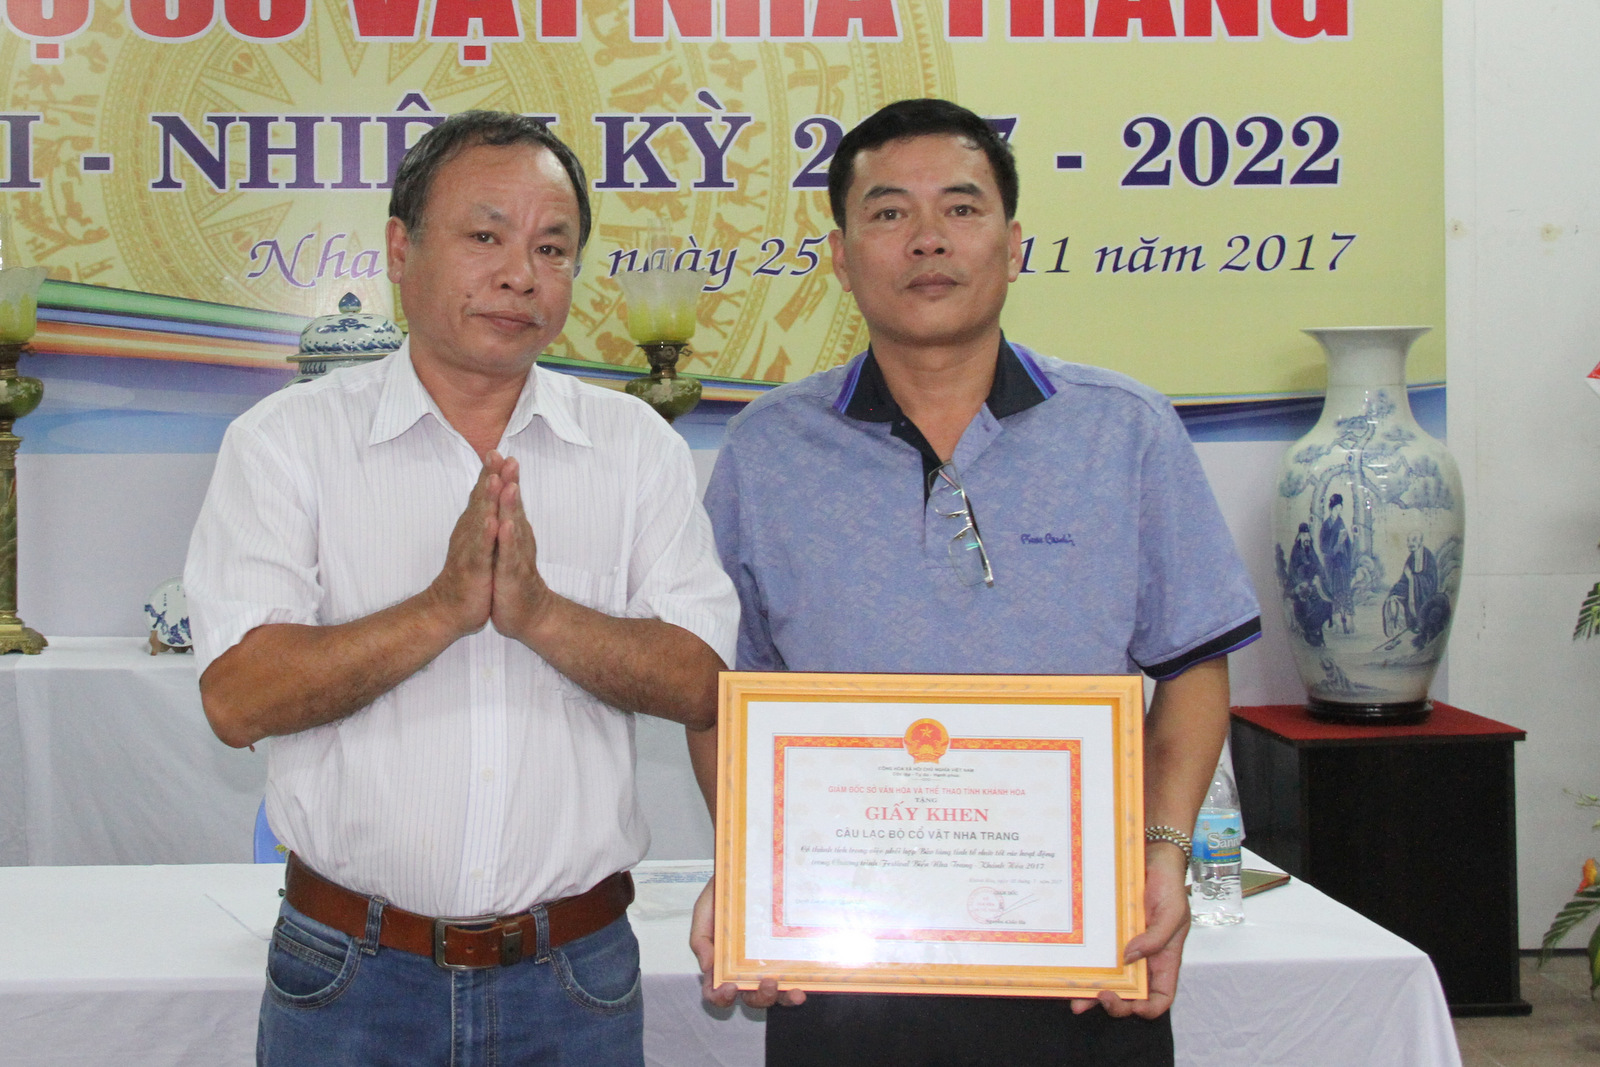 Le Chi Huong, Director of Khanh Hoa Museum, awarding certificate of merit to Nha Trang Antique Club